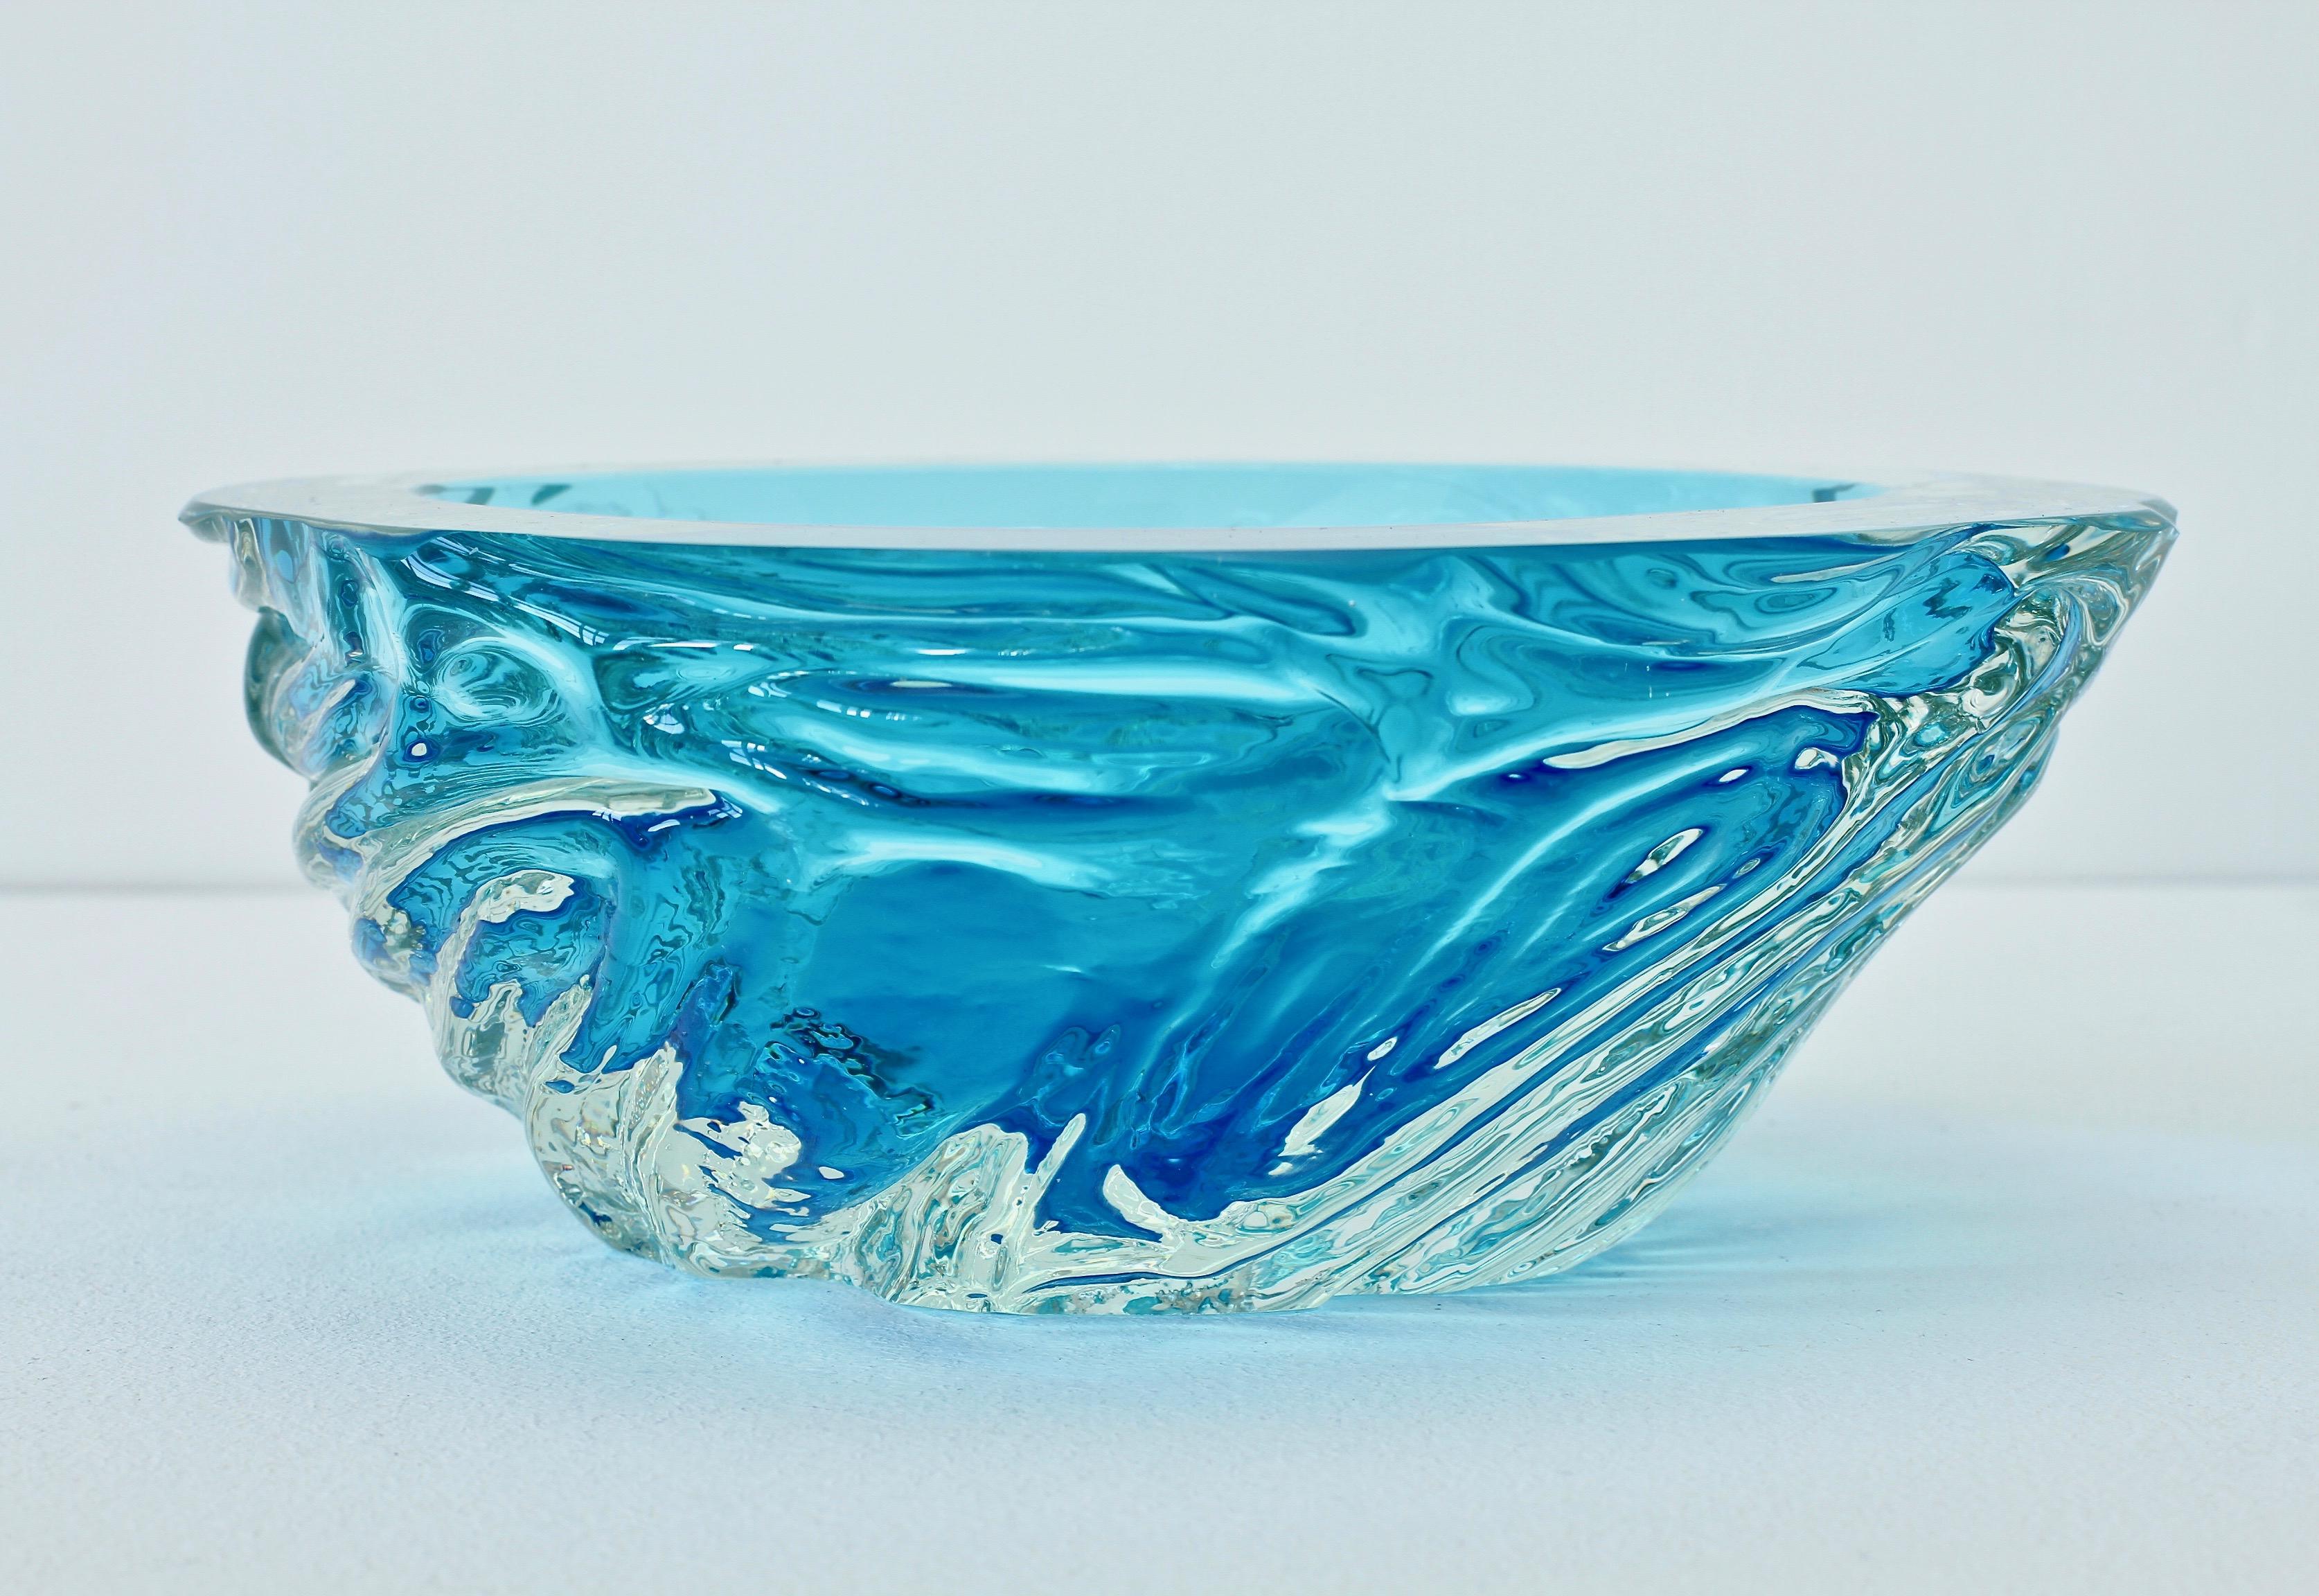 Large vintage textured Italian glass bowl or dish attributed to Maurizio Arabella for Seguso Vetri d'Arte Murano, Italy, circa late 1970s / 1980s. Elegant in form and showing extraordinary craftmanship with the use of the 'Sommerso' technique with